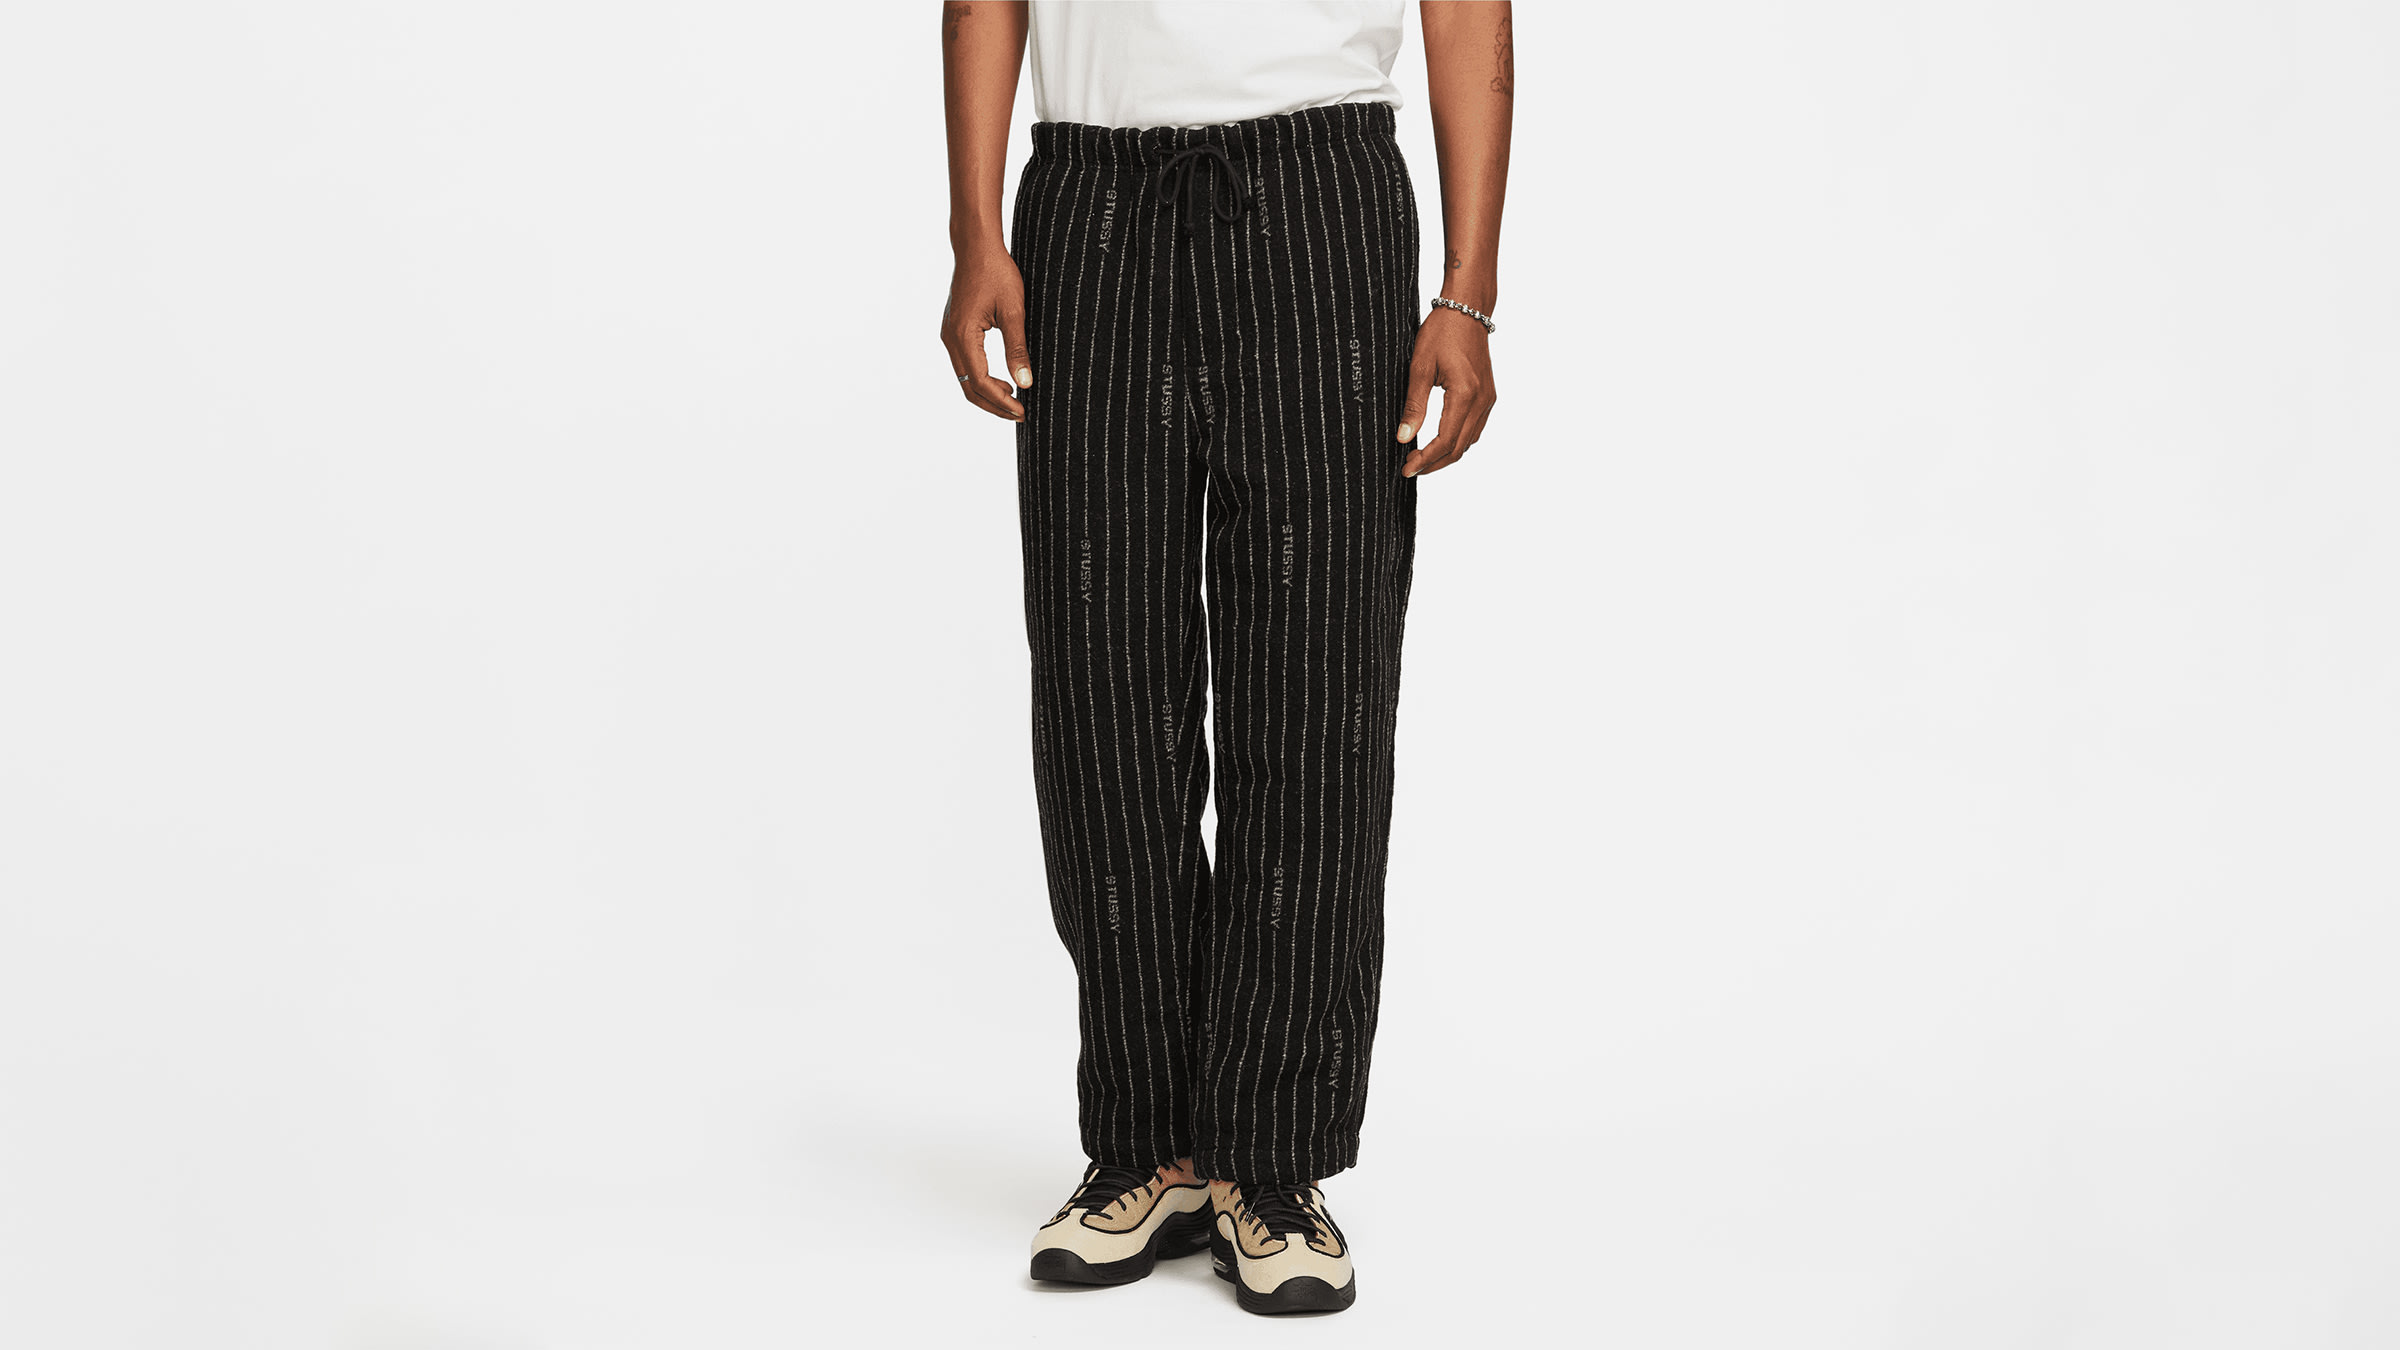 Nike x Stussy Stripe Wool Pant (Antique Black) | END. Launches